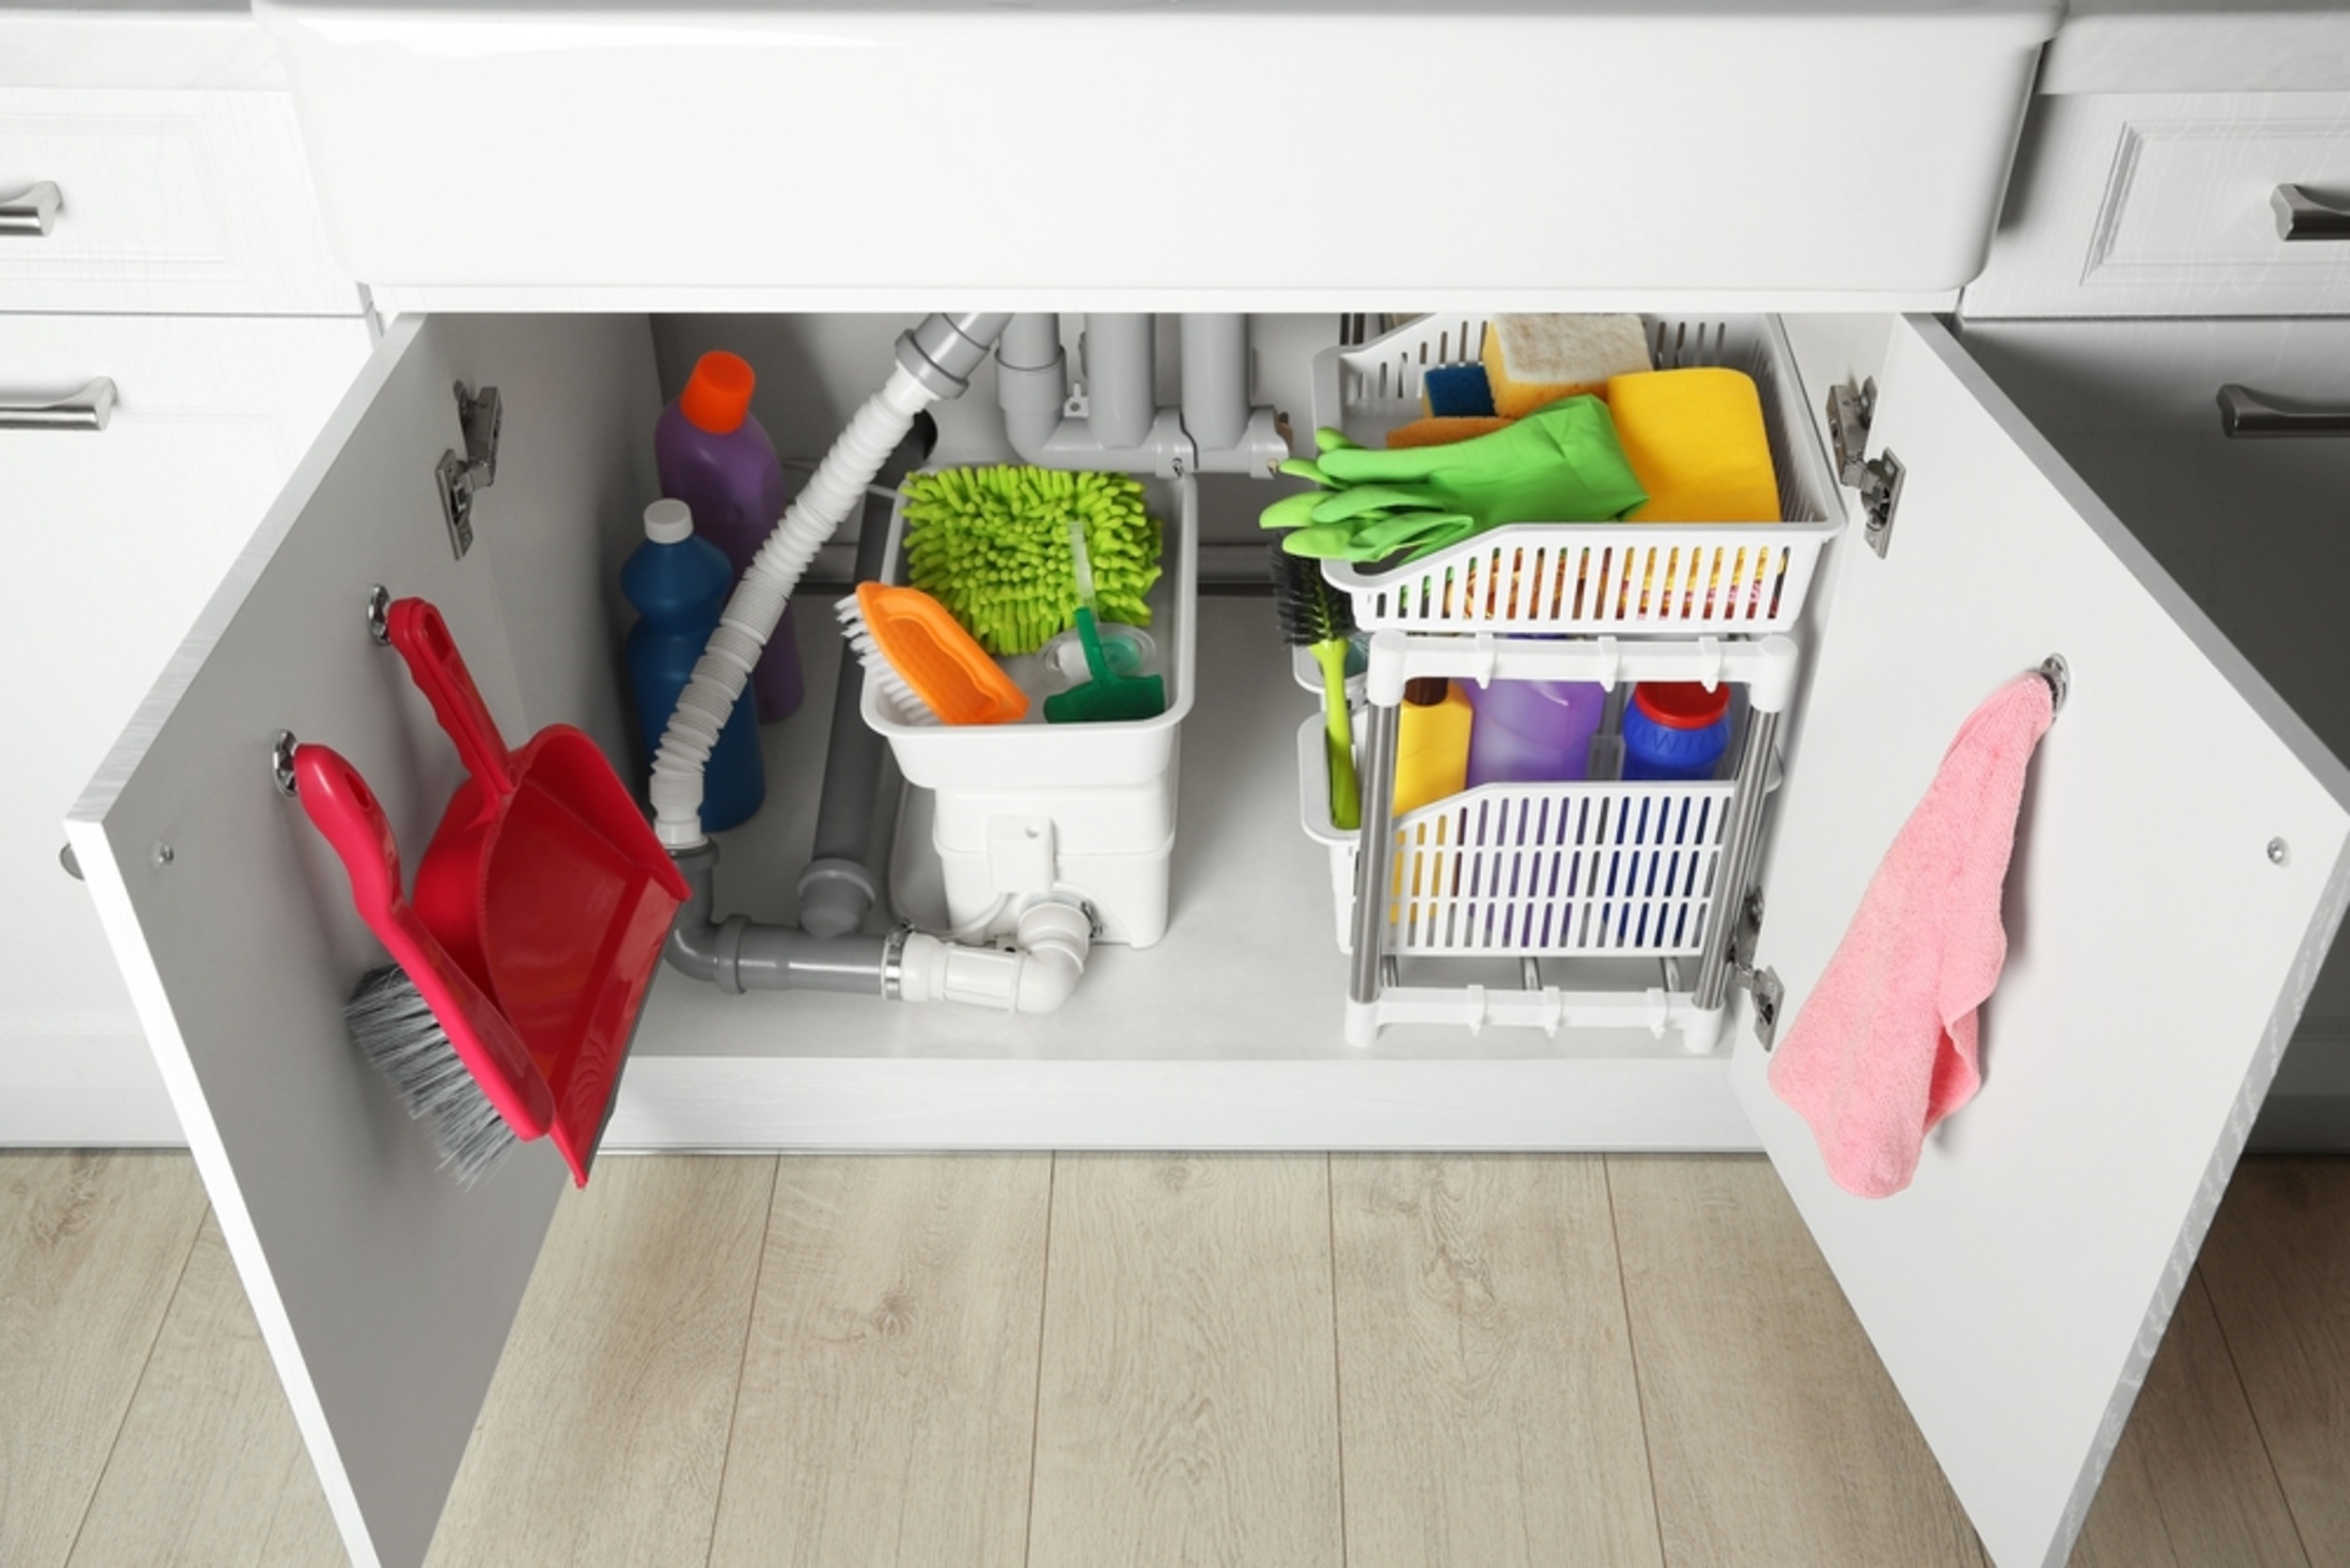 <p>Keeping the space under the sink organized can be a pain, especially when you're frequently hauling out products to clean the bathroom or other spaces. Use baskets with handles to organize cleaning supplies according to their use, and simply remove the basket with all the supplies you need instead of dragging out each item individually. </p><p><a href='https://www.msn.com/en-us/community/channel/vid-cj9pqbr0vn9in2b6ddcd8sfgpfq6x6utp44fssrv6mc2gtybw0us'>Follow us on MSN to see more of our exclusive lifestyle content.</a></p>